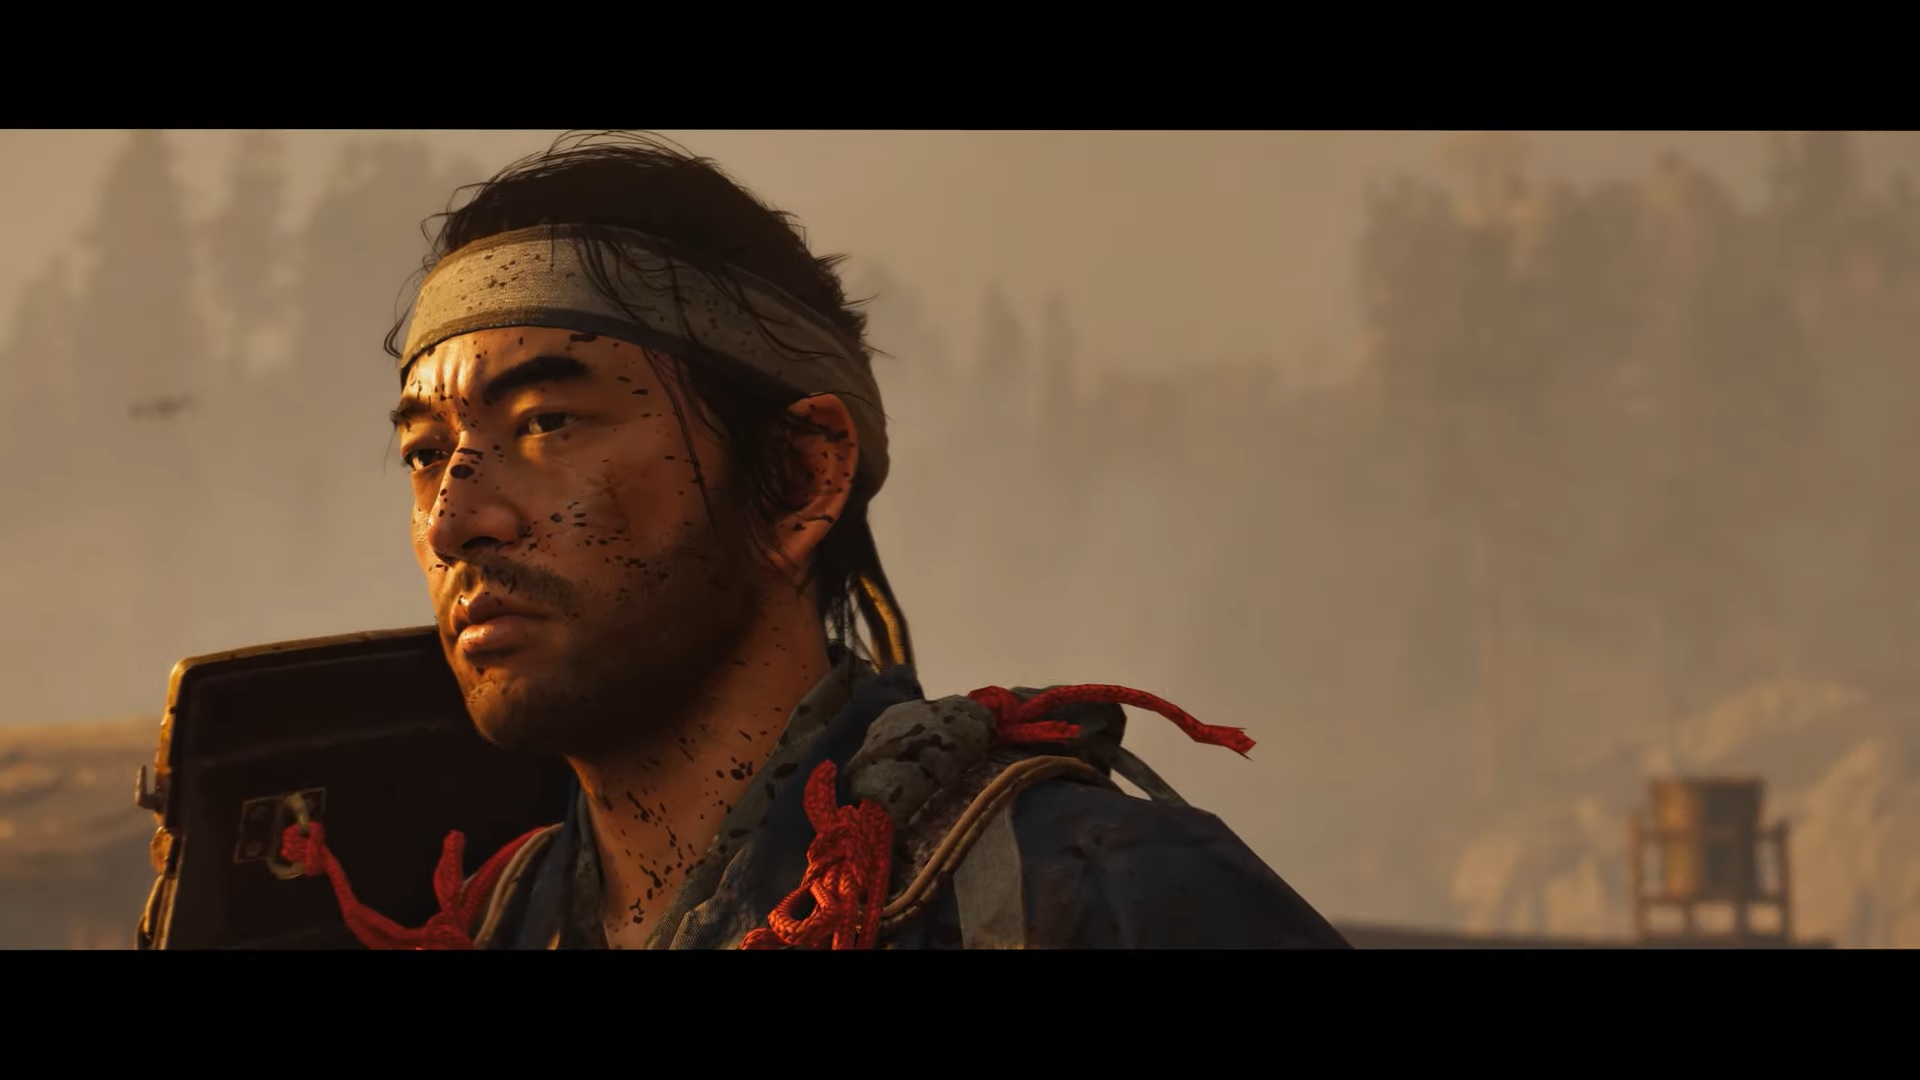 Ghost of Tsushima gets a release date – and it could be the last